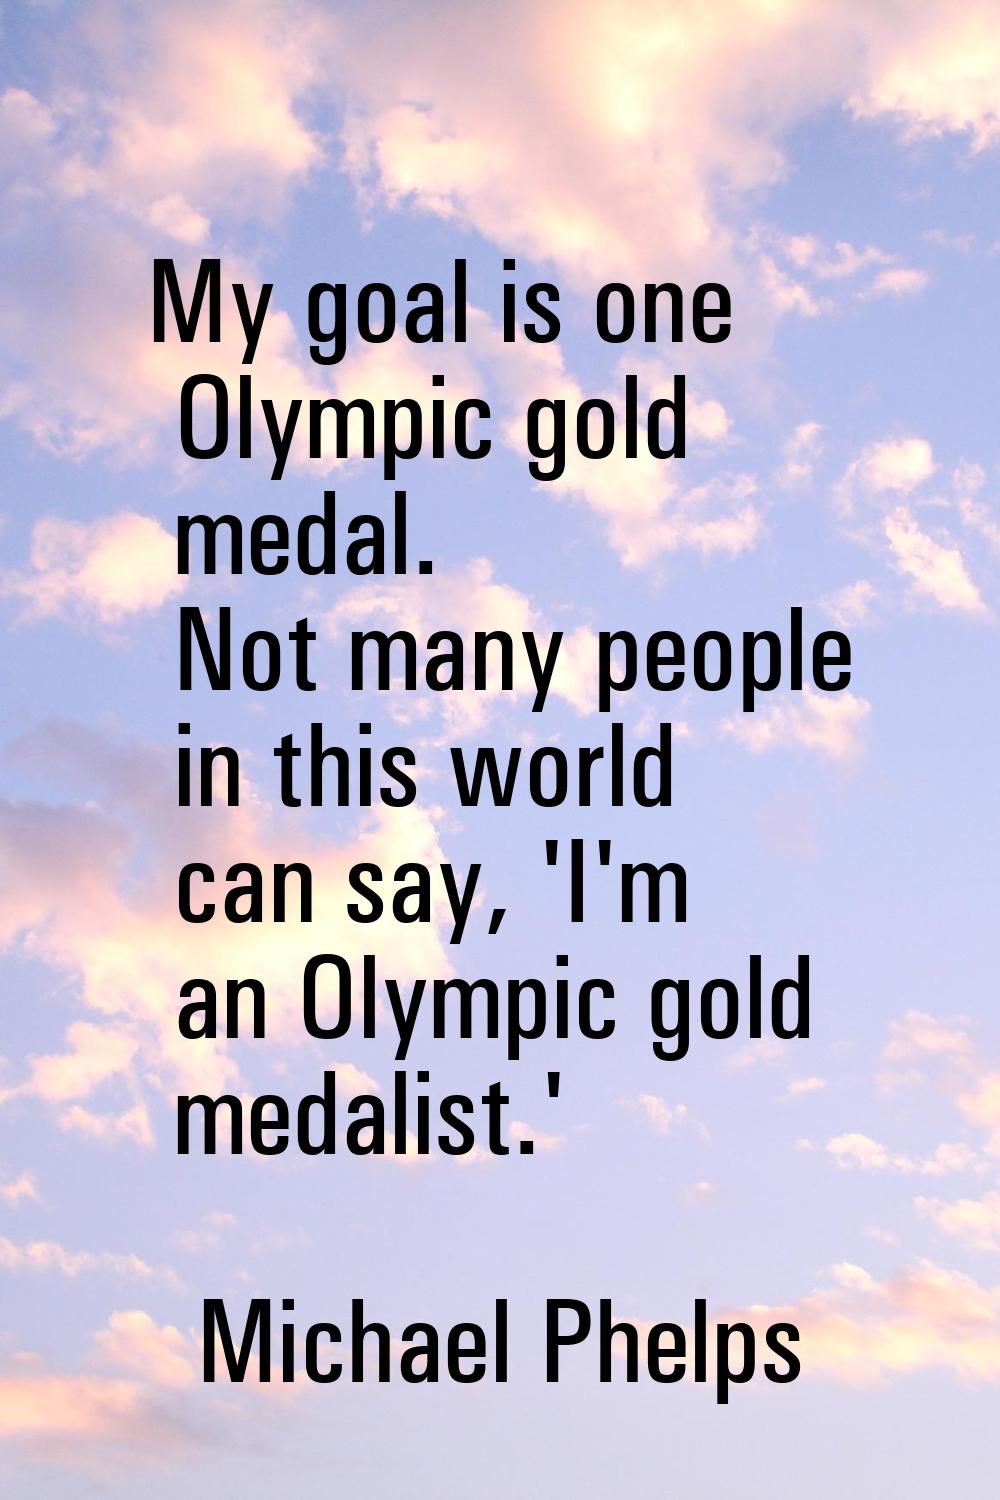 My goal is one Olympic gold medal. Not many people in this world can say, 'I'm an Olympic gold meda